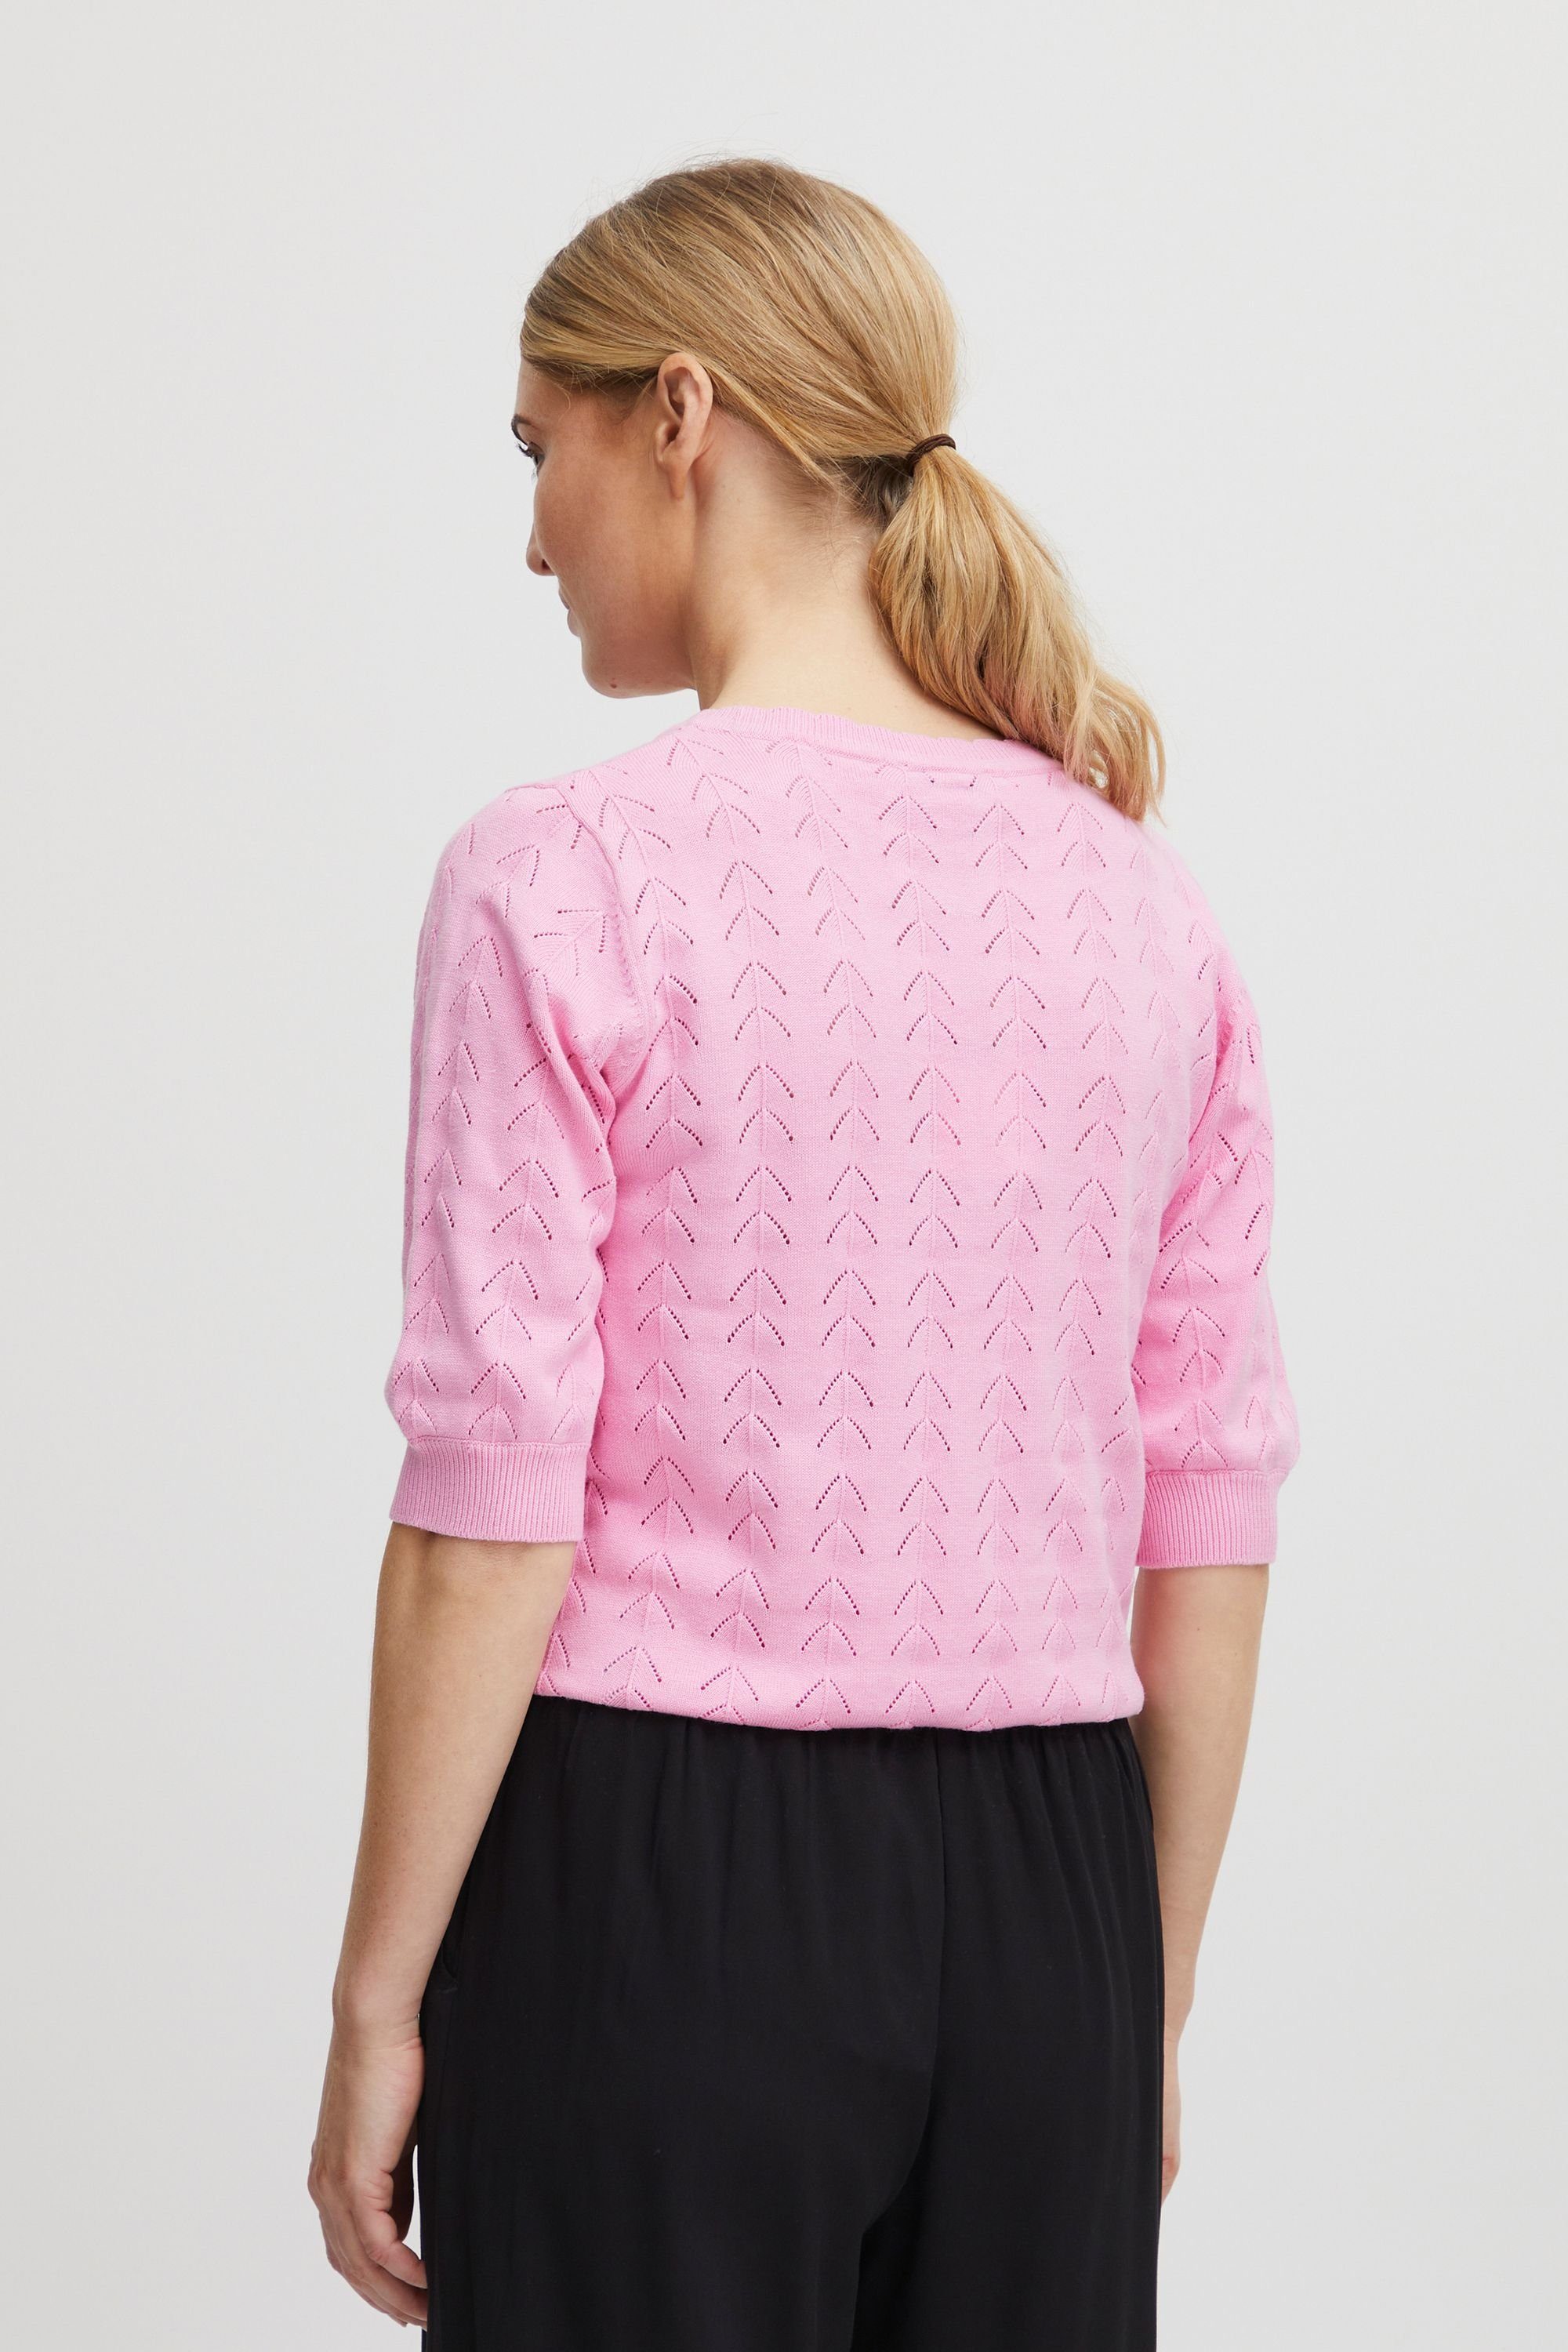 JUMPER (152215) - S Begonia Strickpullover b.young Pink 20813004 BYMONNI